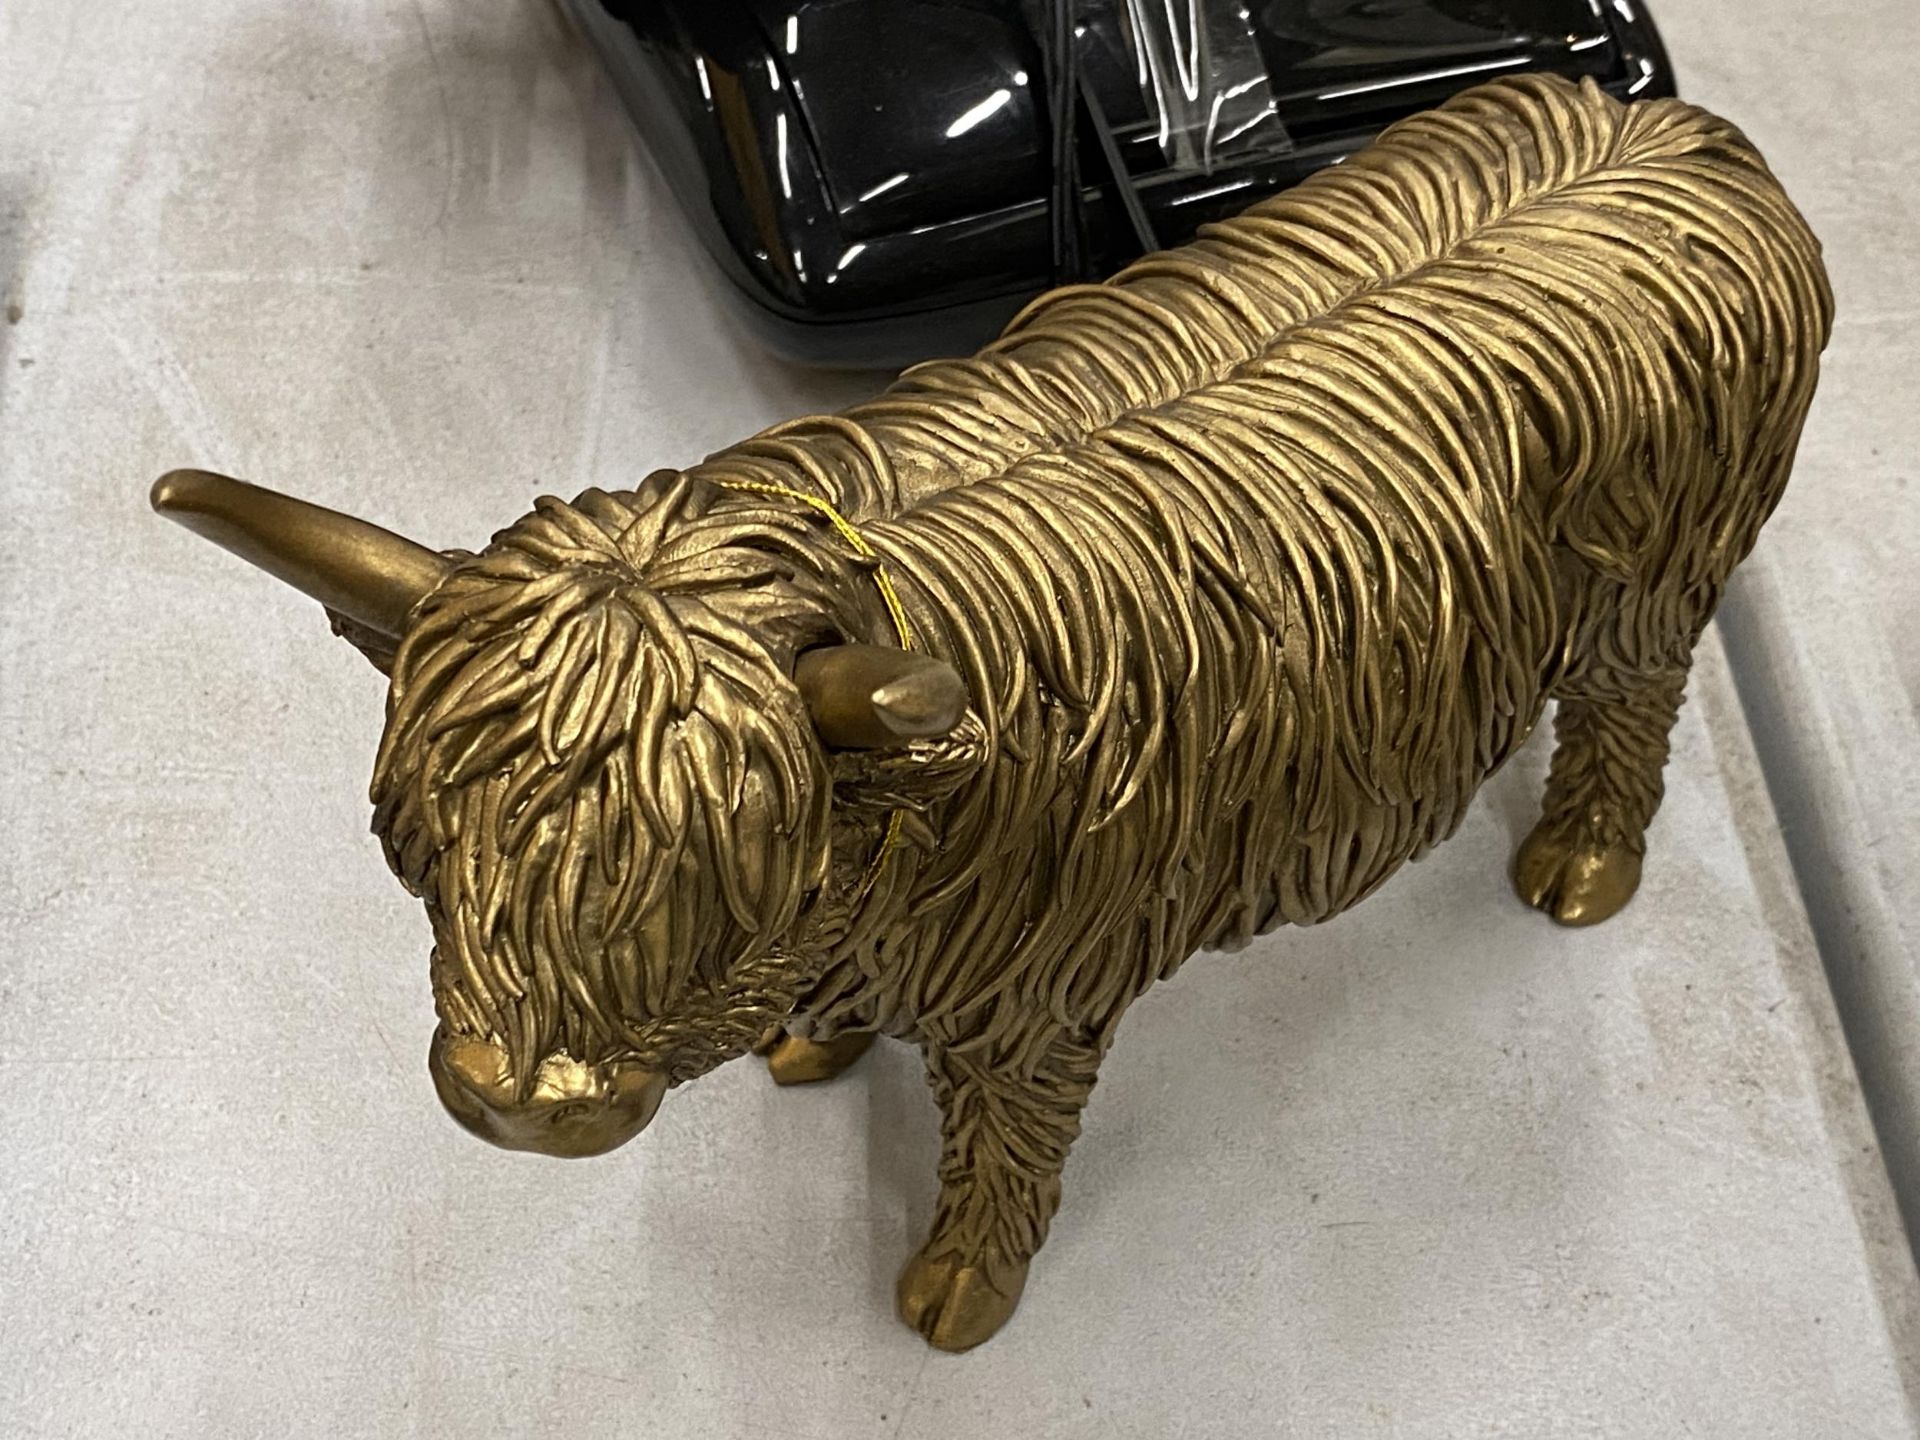 A GOLD COLOURED MODEL OF A HIGHLAND COW BY LEONARDO REFLECTIONS PLUS A BOXED ATLAS EDITIONS - Image 3 of 5